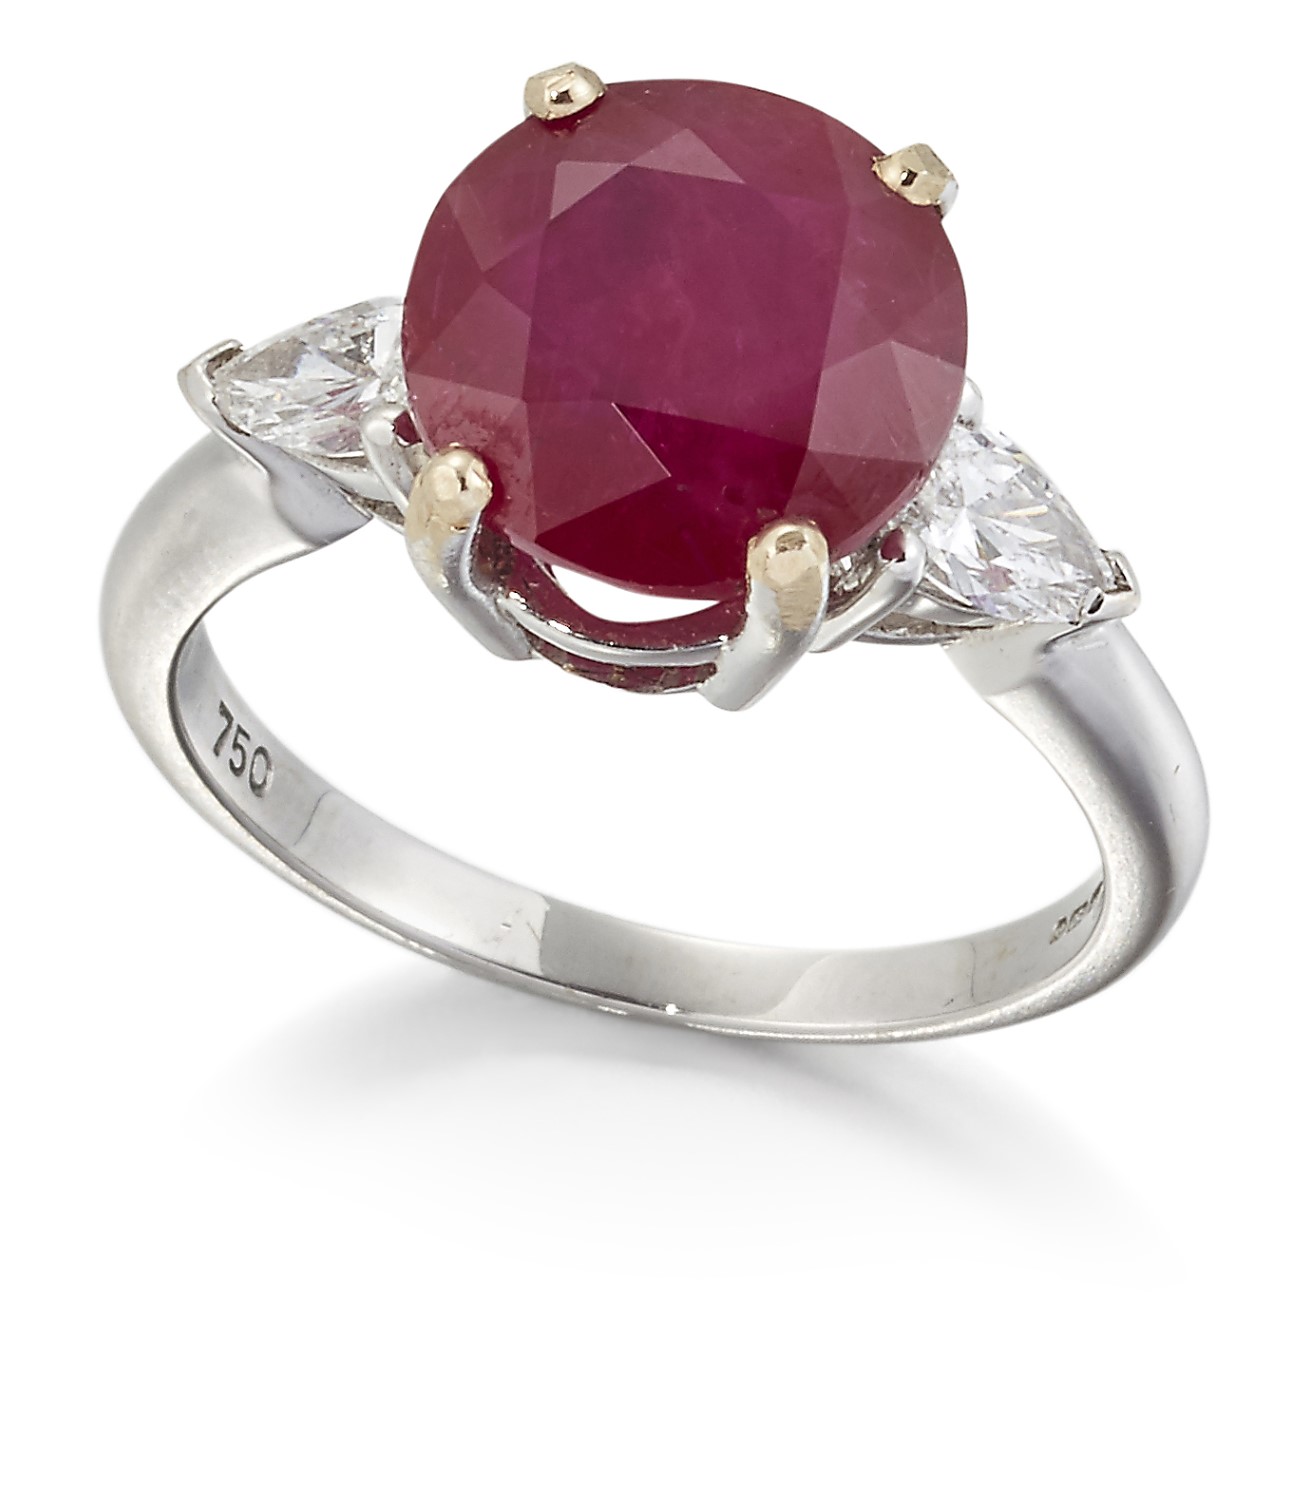 AN 18CT WHITE GOLD RUBY AND DIAMOND THREE STONE RING